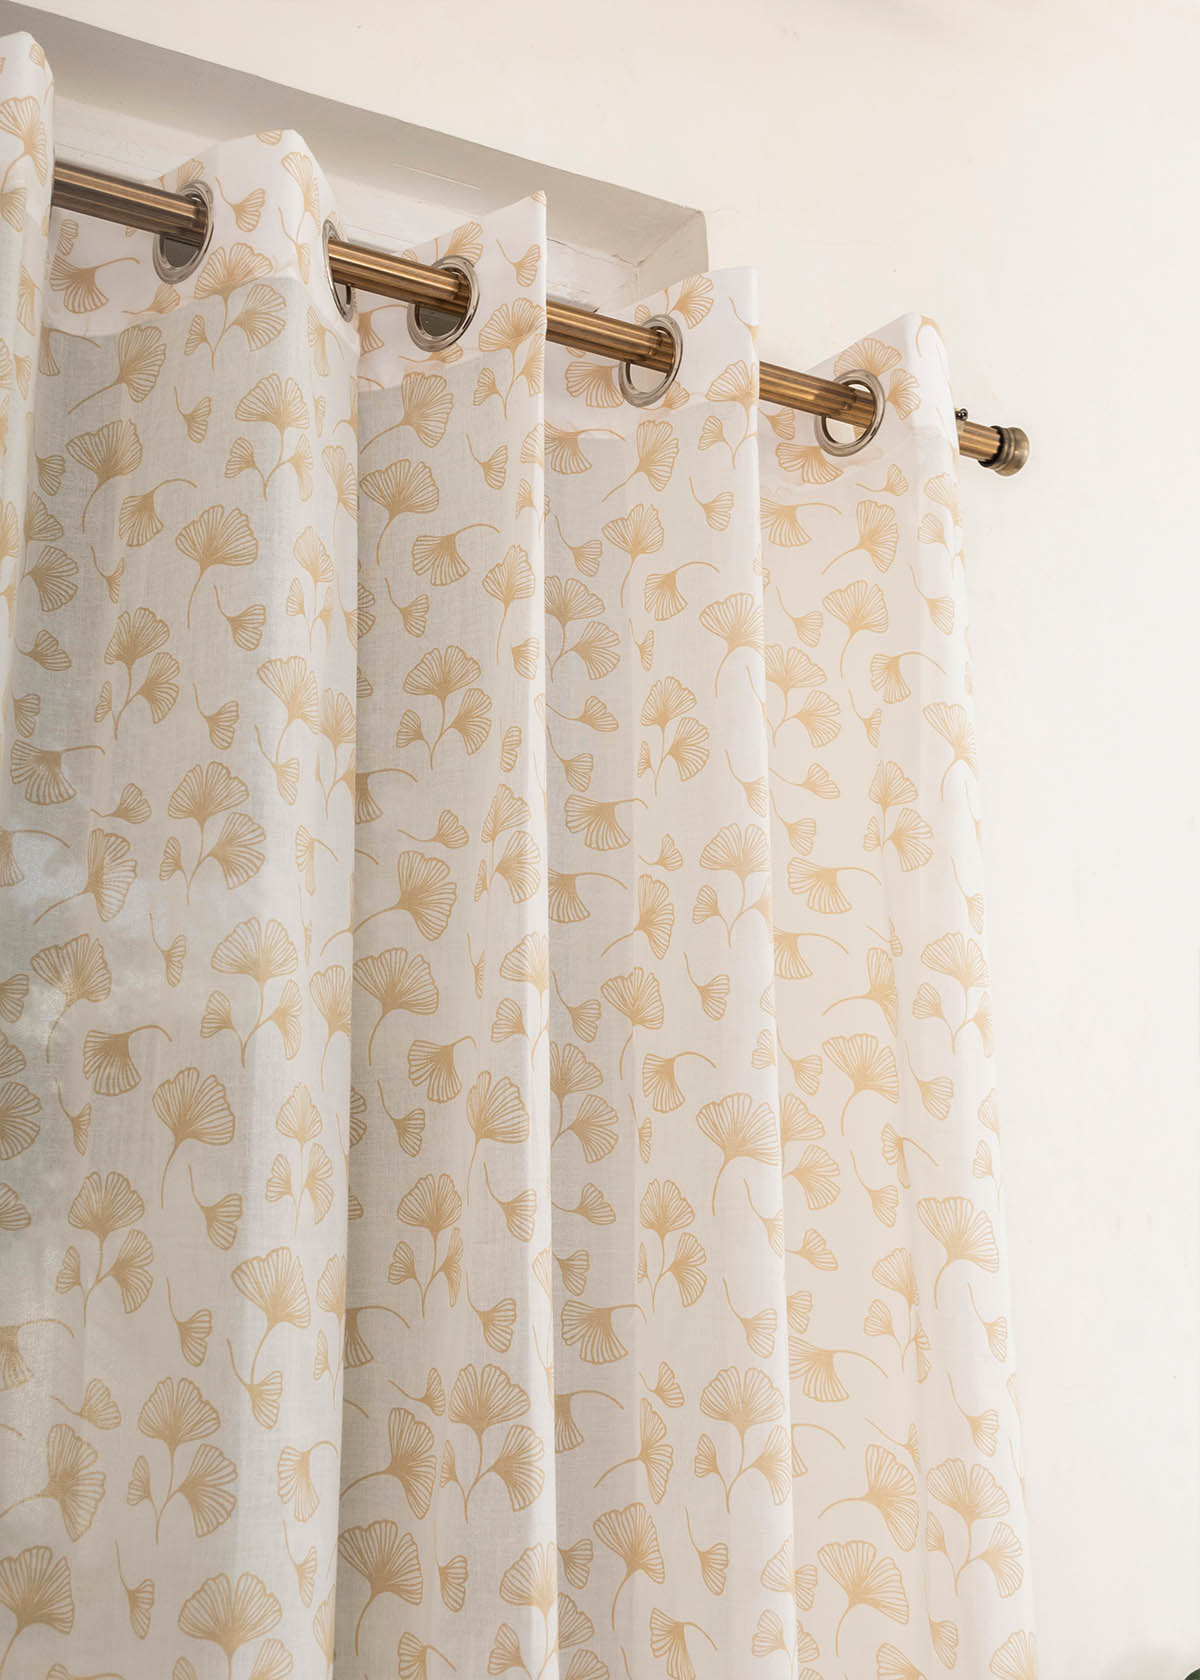 Gingko 100% Customizable Cotton sheer floral curtain for living room -  Light filtering - Multicolor